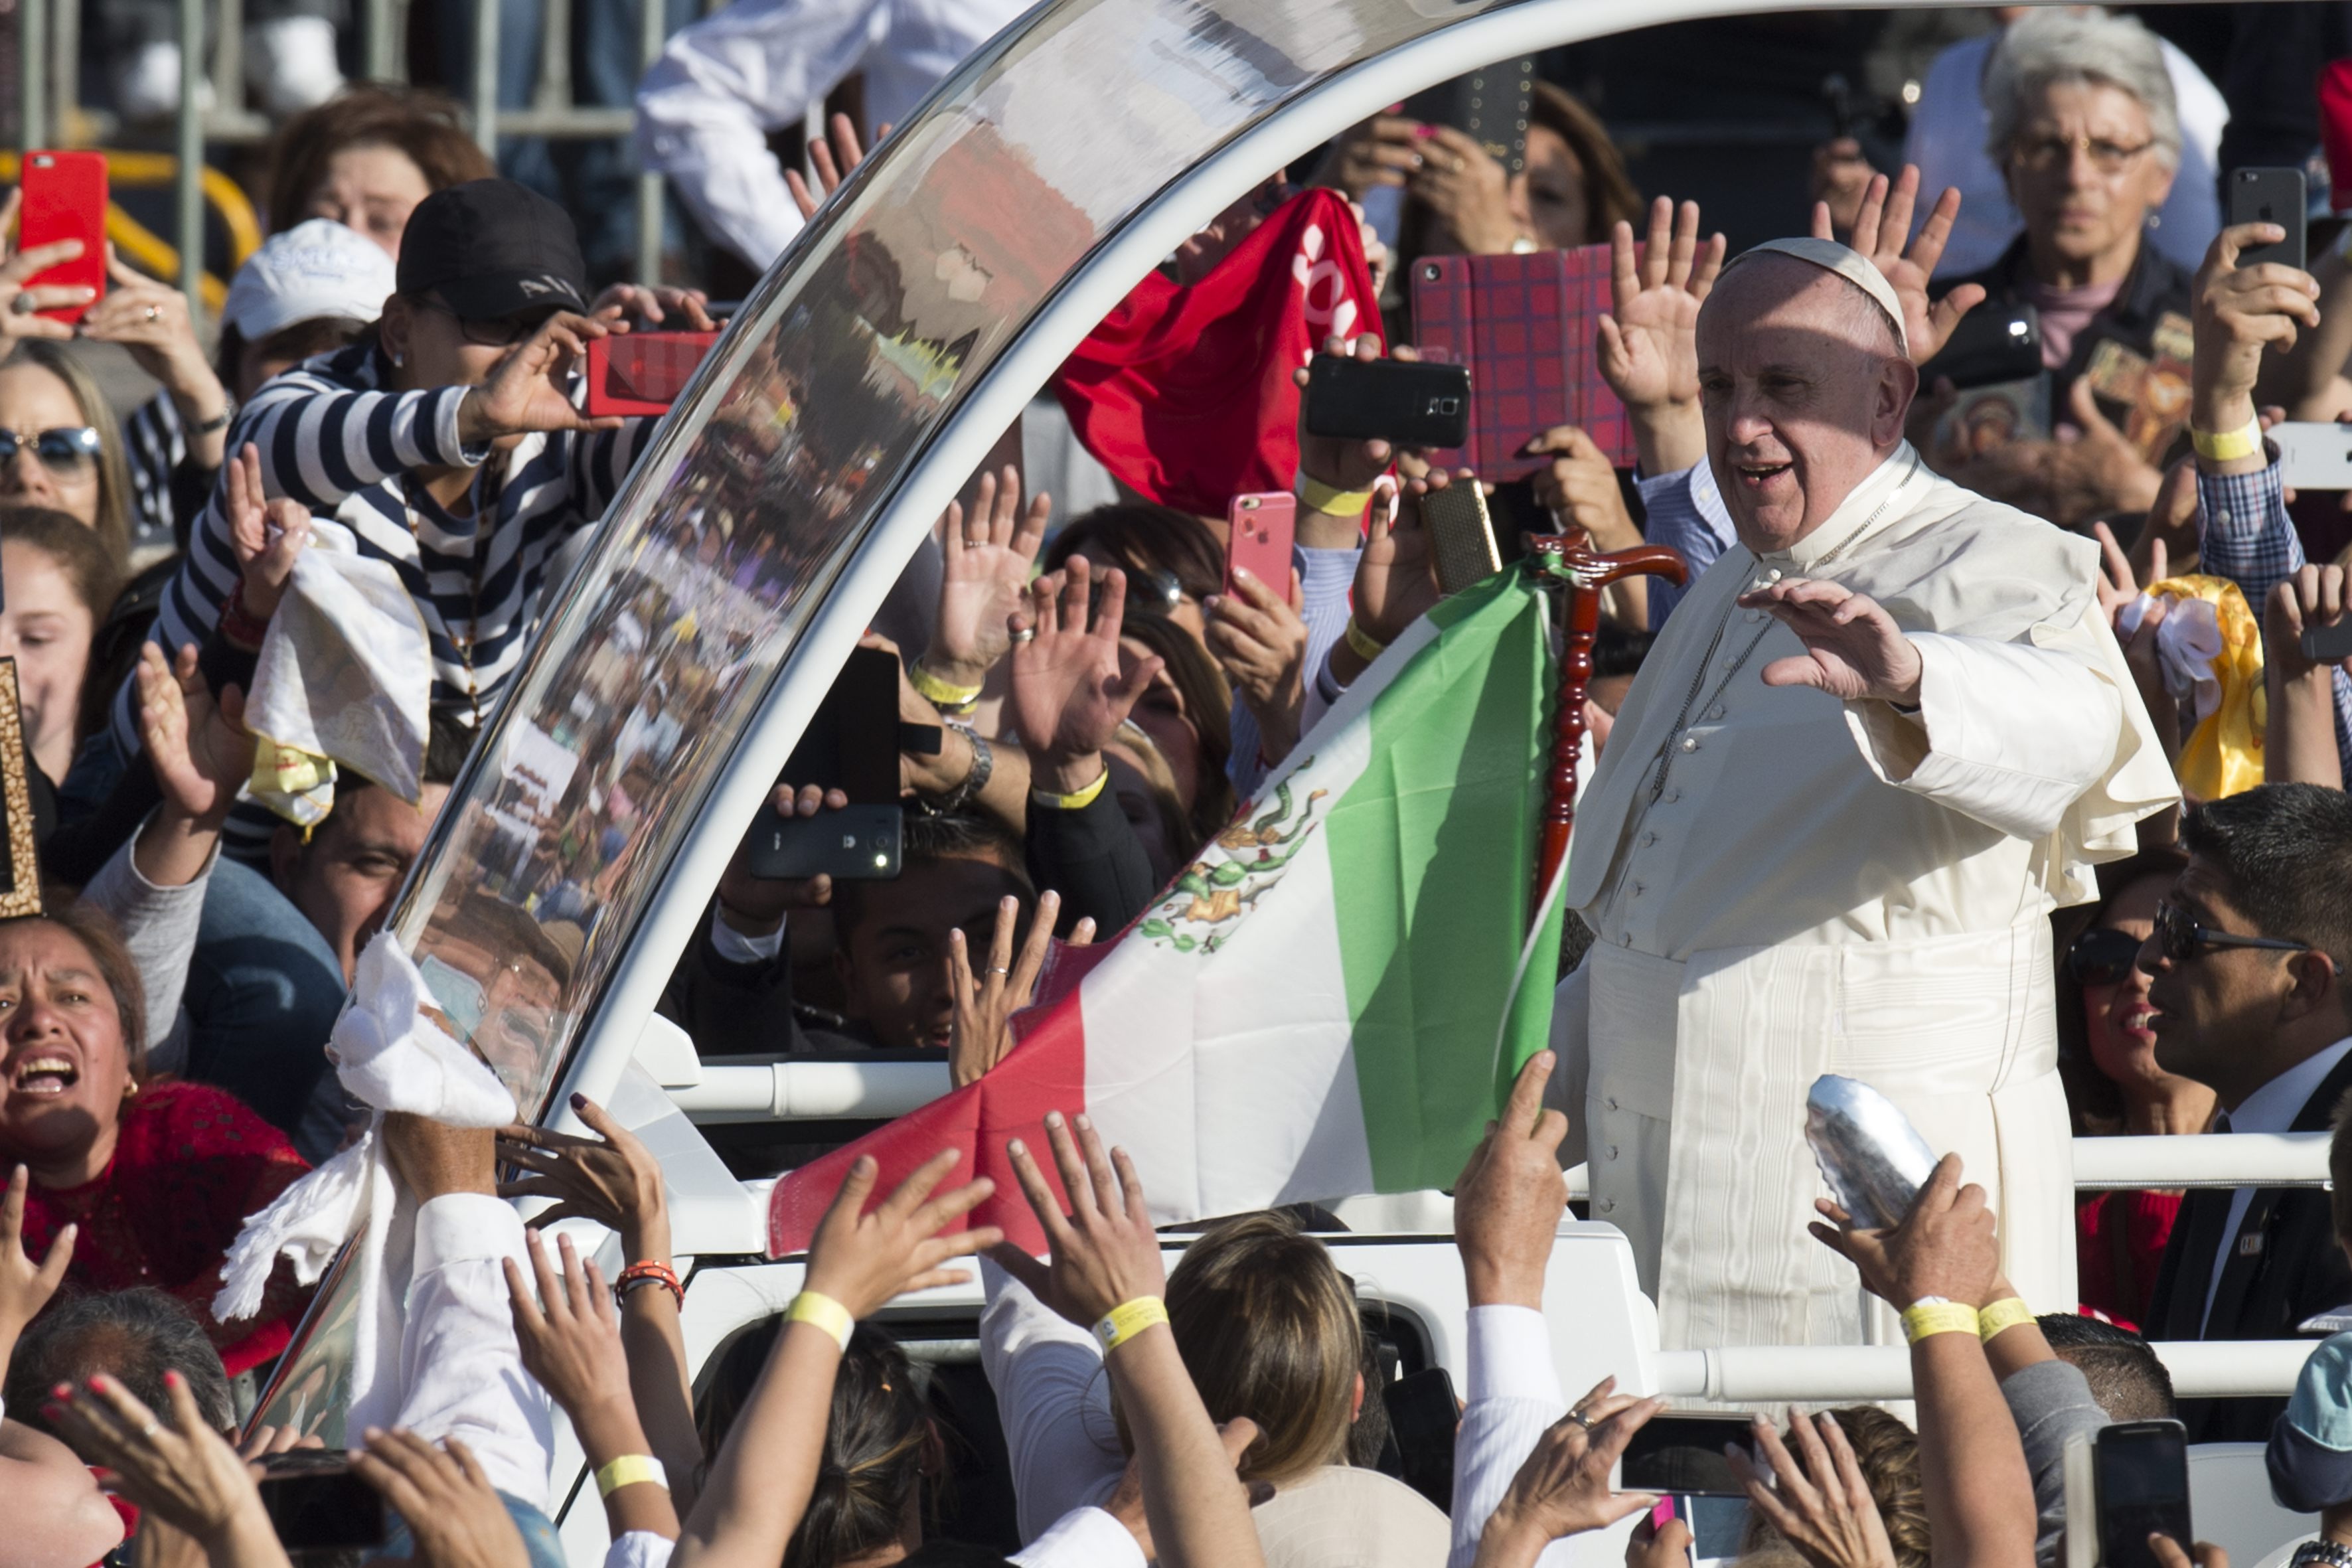 In this photo taken on Saturday, Feb. 13, 2016, Pope Francis waves to people as he arrives to the Basilica of the Virgin of Guadalupe in Mexico City, Saturday, Feb. 13, 2016. Francis will celebrate Mass at the Basilica, considered the largest and most important Marian shrine in the world. (L'Osservatore Romano/Pool Photo via AP)